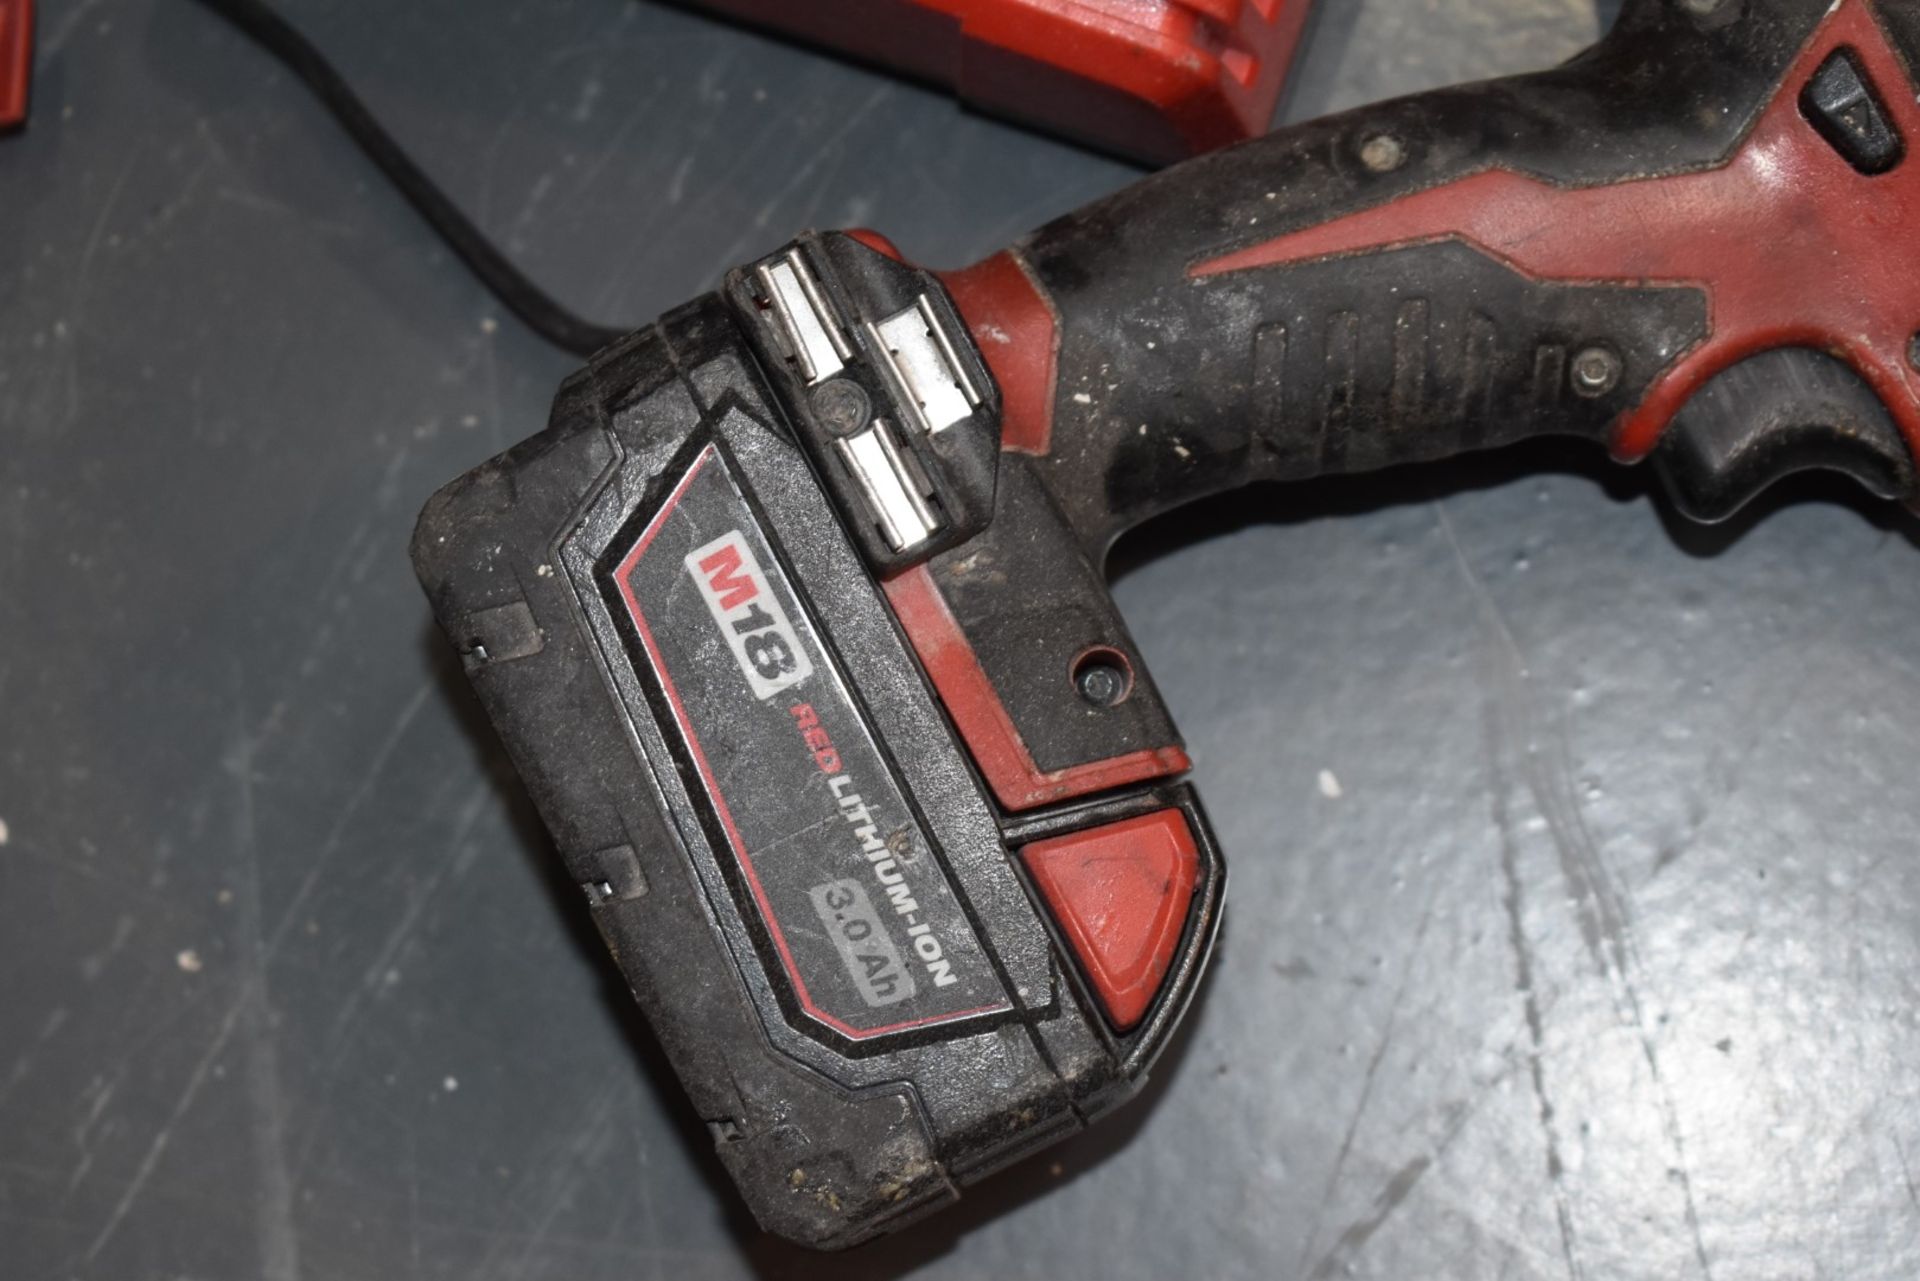 1 x Milwaukee Cordless Heavy Duty Drill Set - Includes 2 x Drills, 2 x Batteries and 1 x Charger - - Image 3 of 7